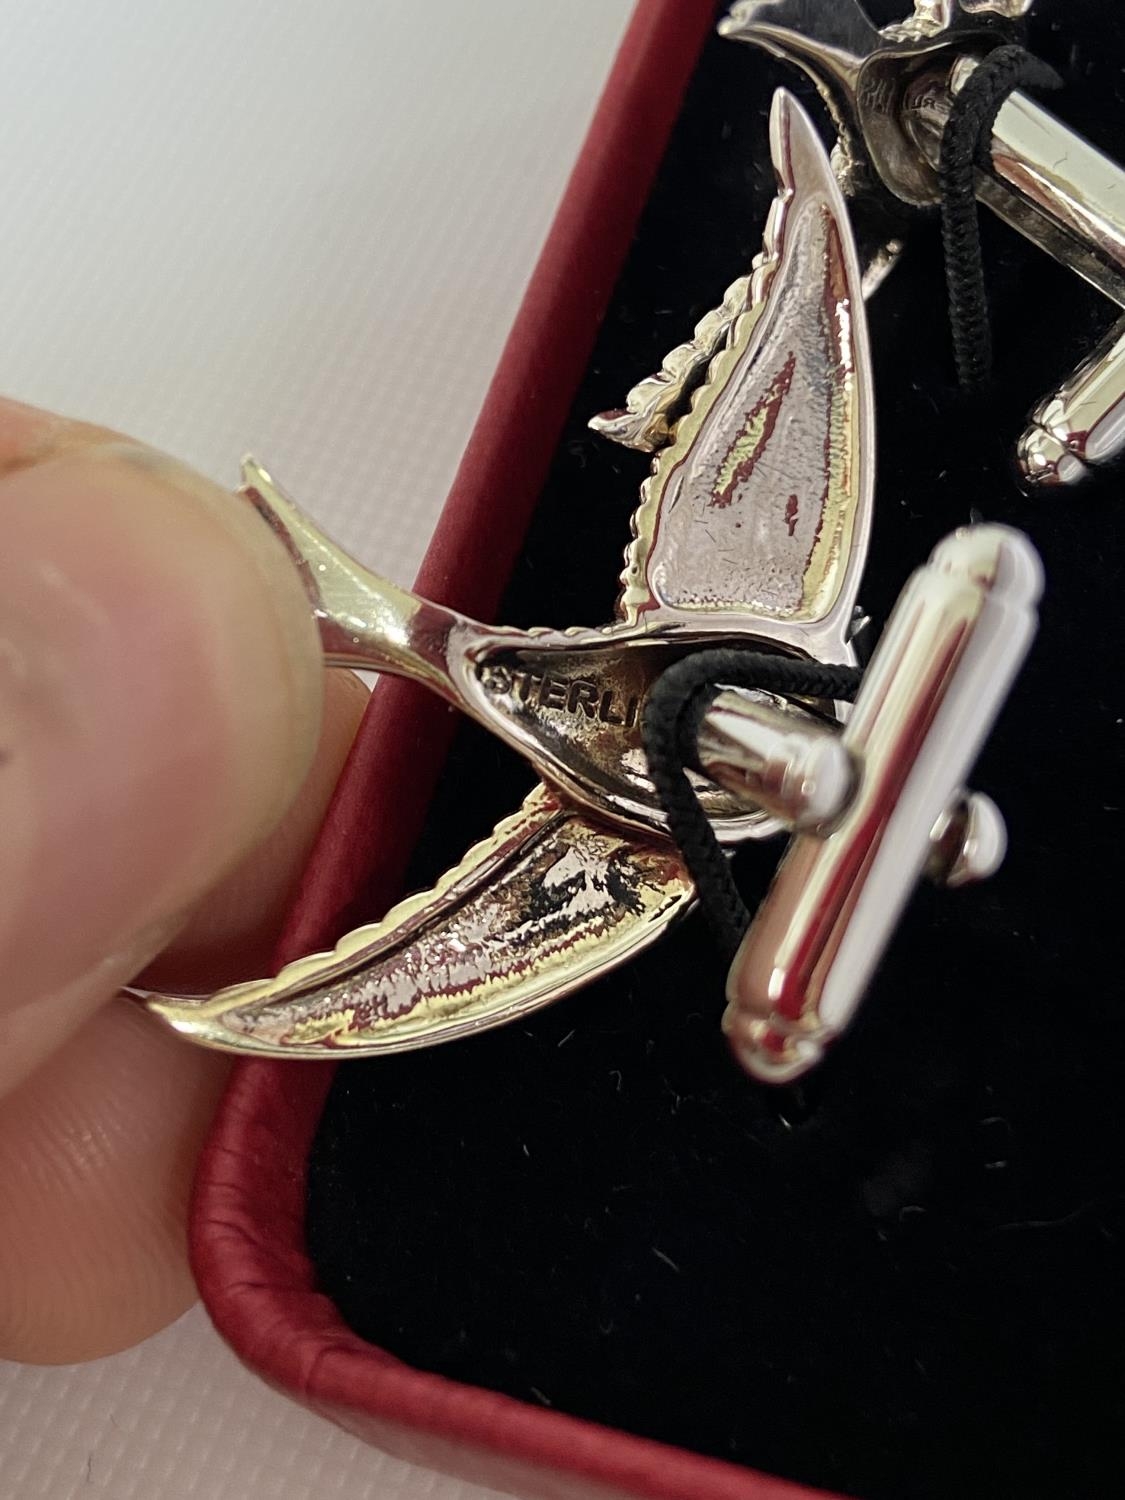 A pair of Sterling silver swallow cufflinks - Image 3 of 4